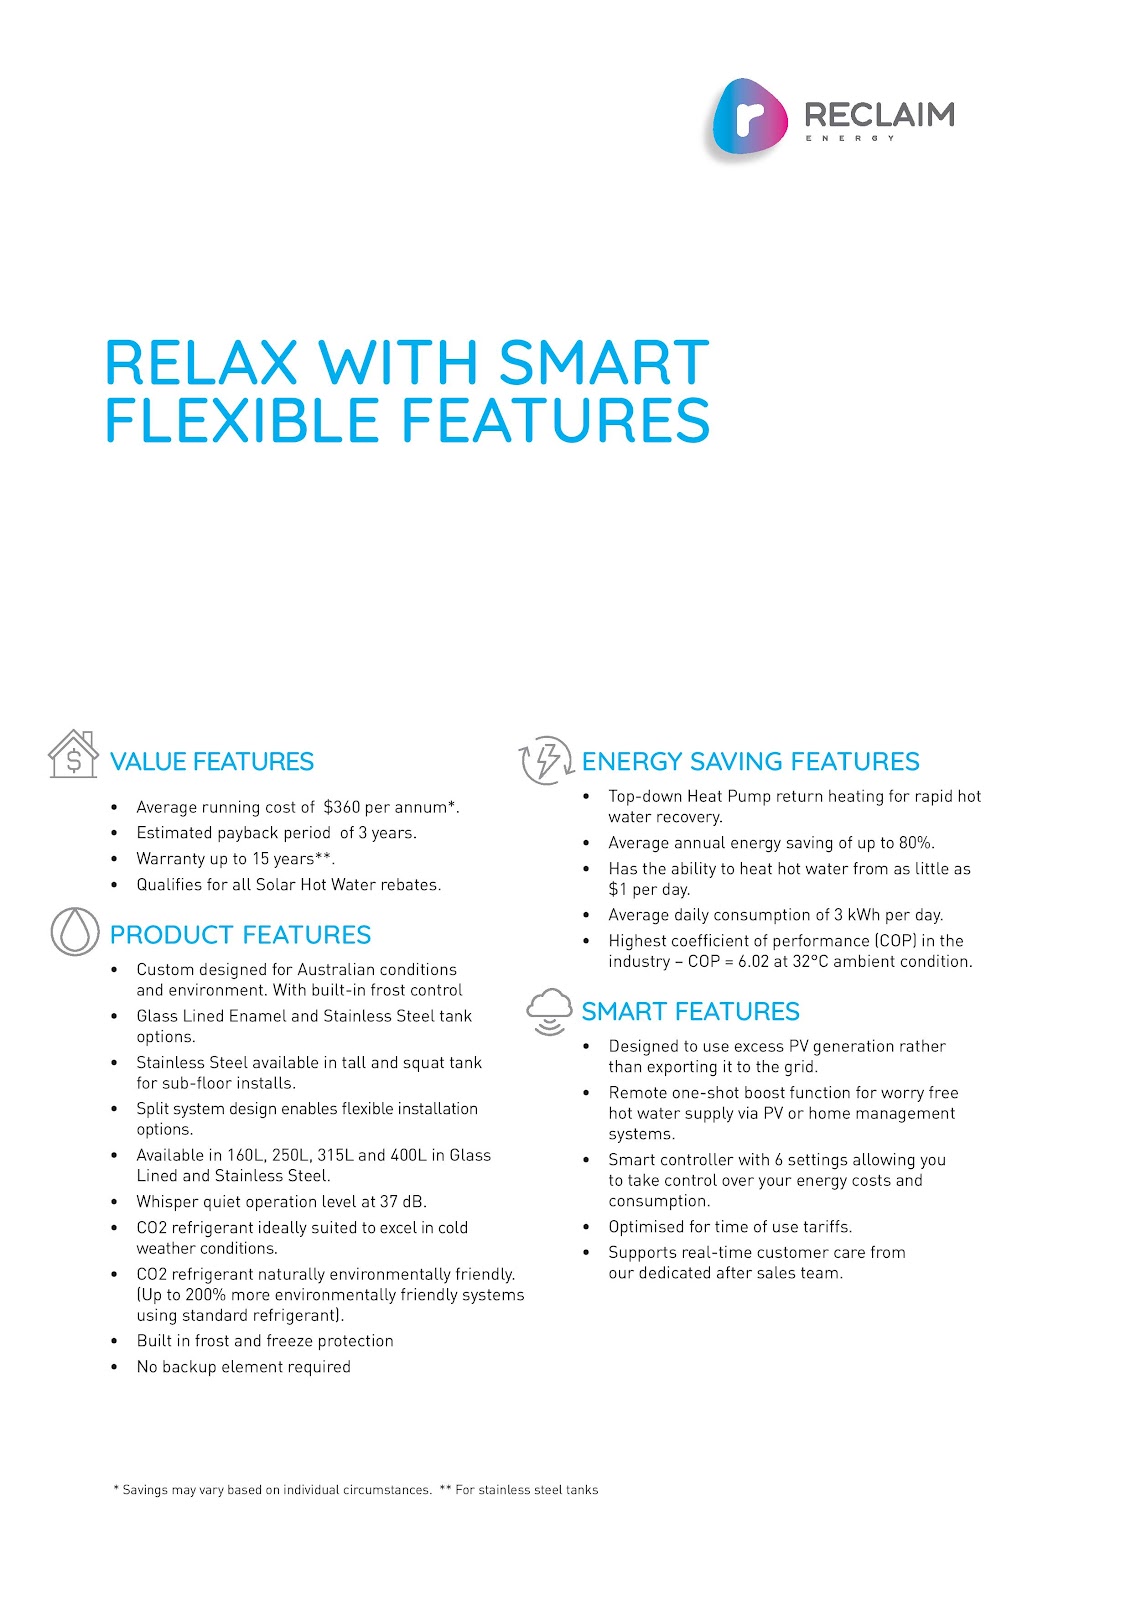 Relax with smart flexible features